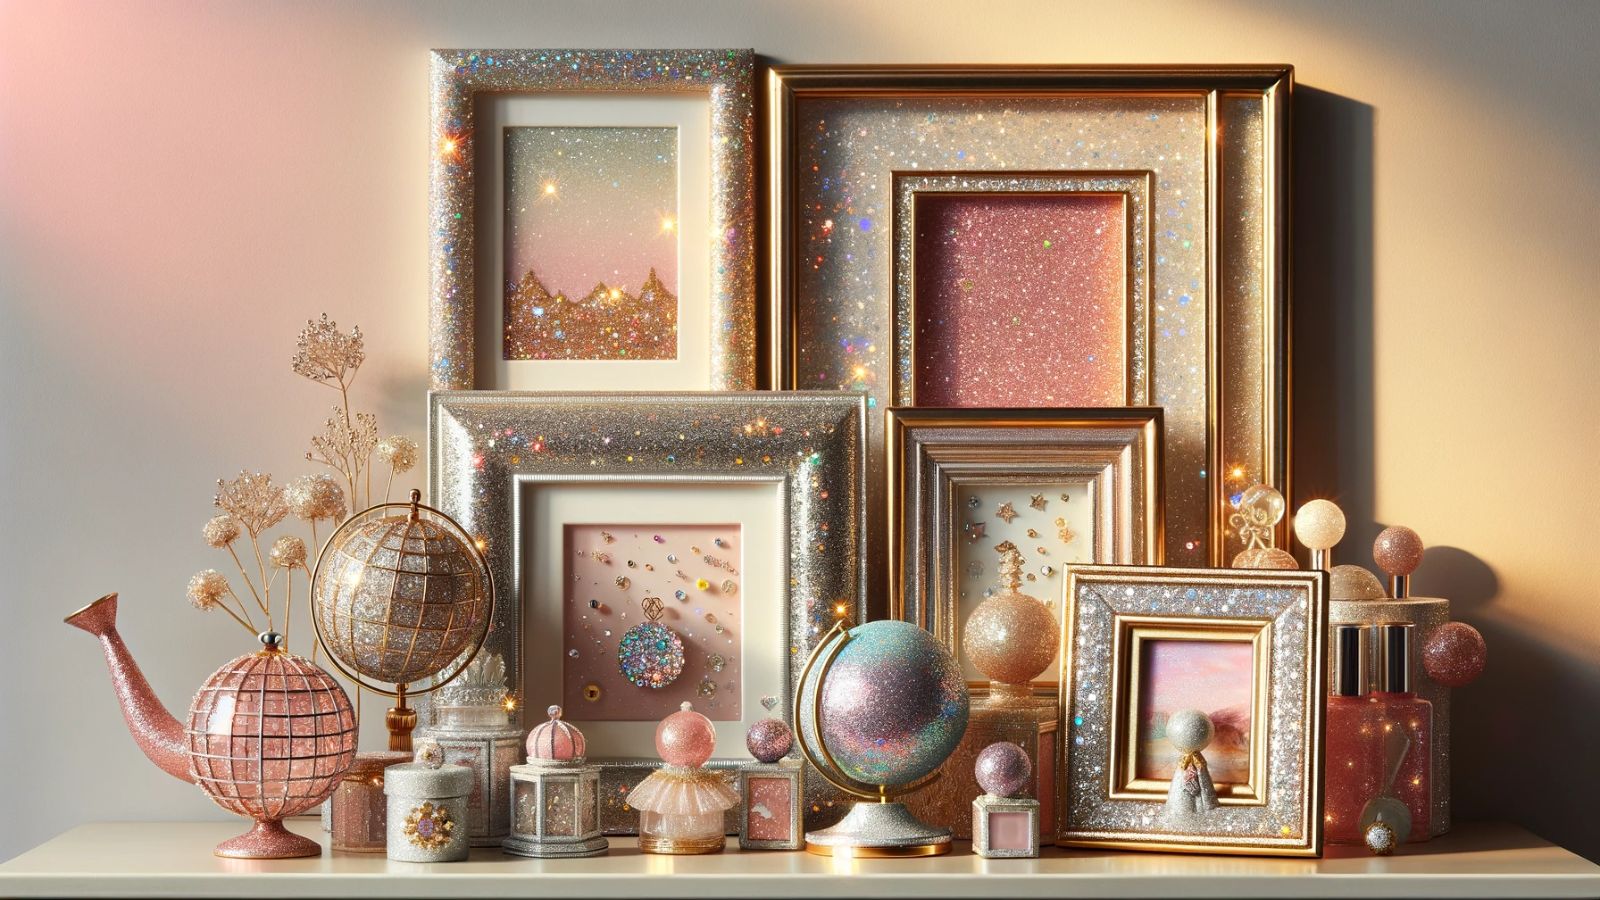 <p>From snow globes to fridge magnets, these tacky little trinkets often find their way into our hearts and homes. We might mock them as tourist traps, but secretly, we love the memories and smiles they bring, reminding us of our travels and adventures.</p>